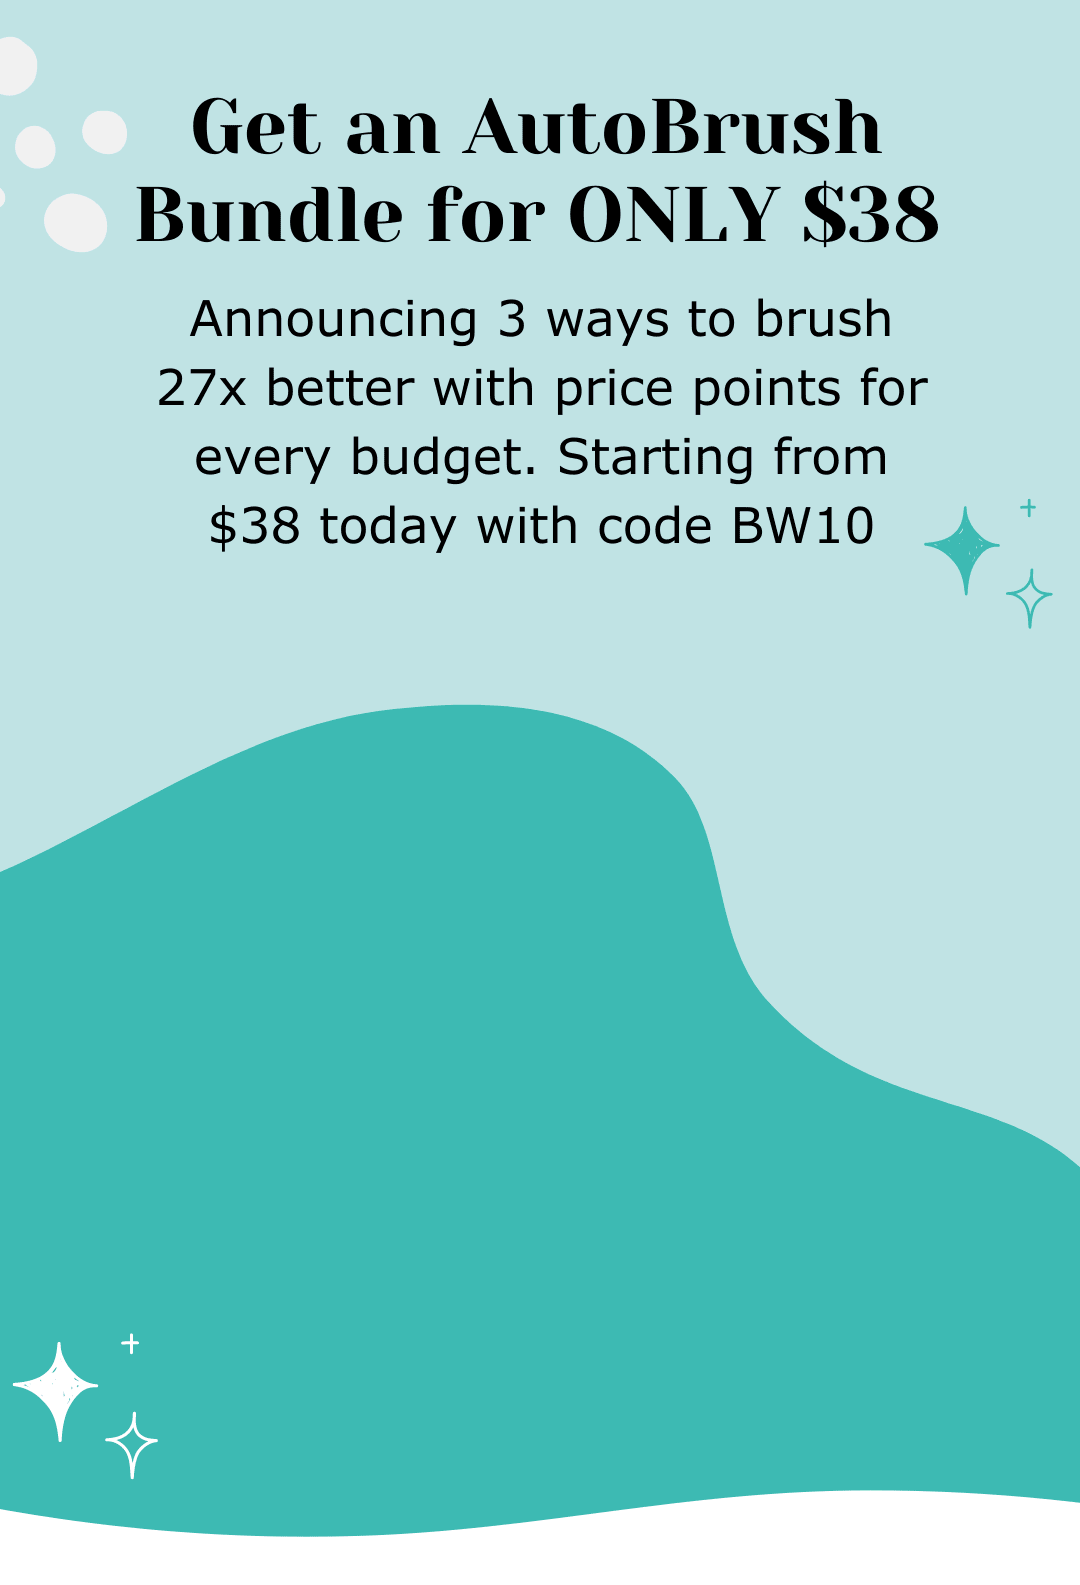 Get an AutoBrush Bundle for ONLY $38